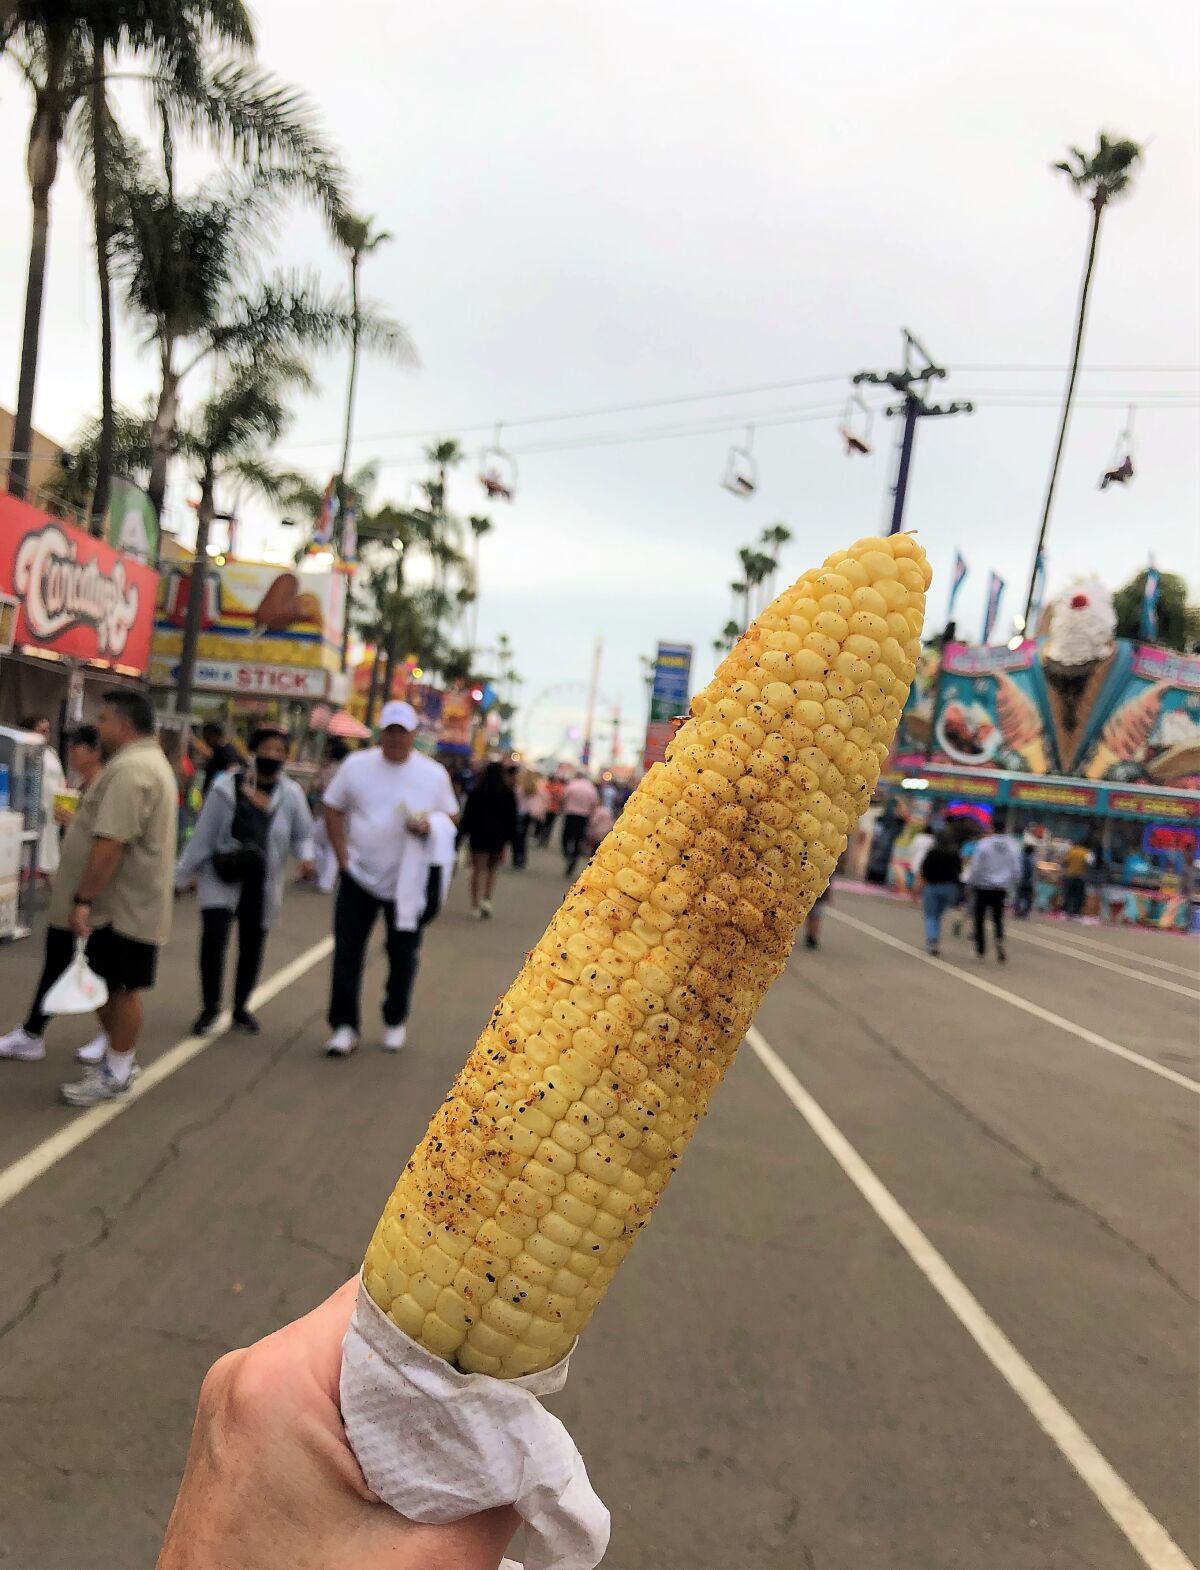 Roasted corn on the cob from Corn Star at the 2022 San Diego County Fair.